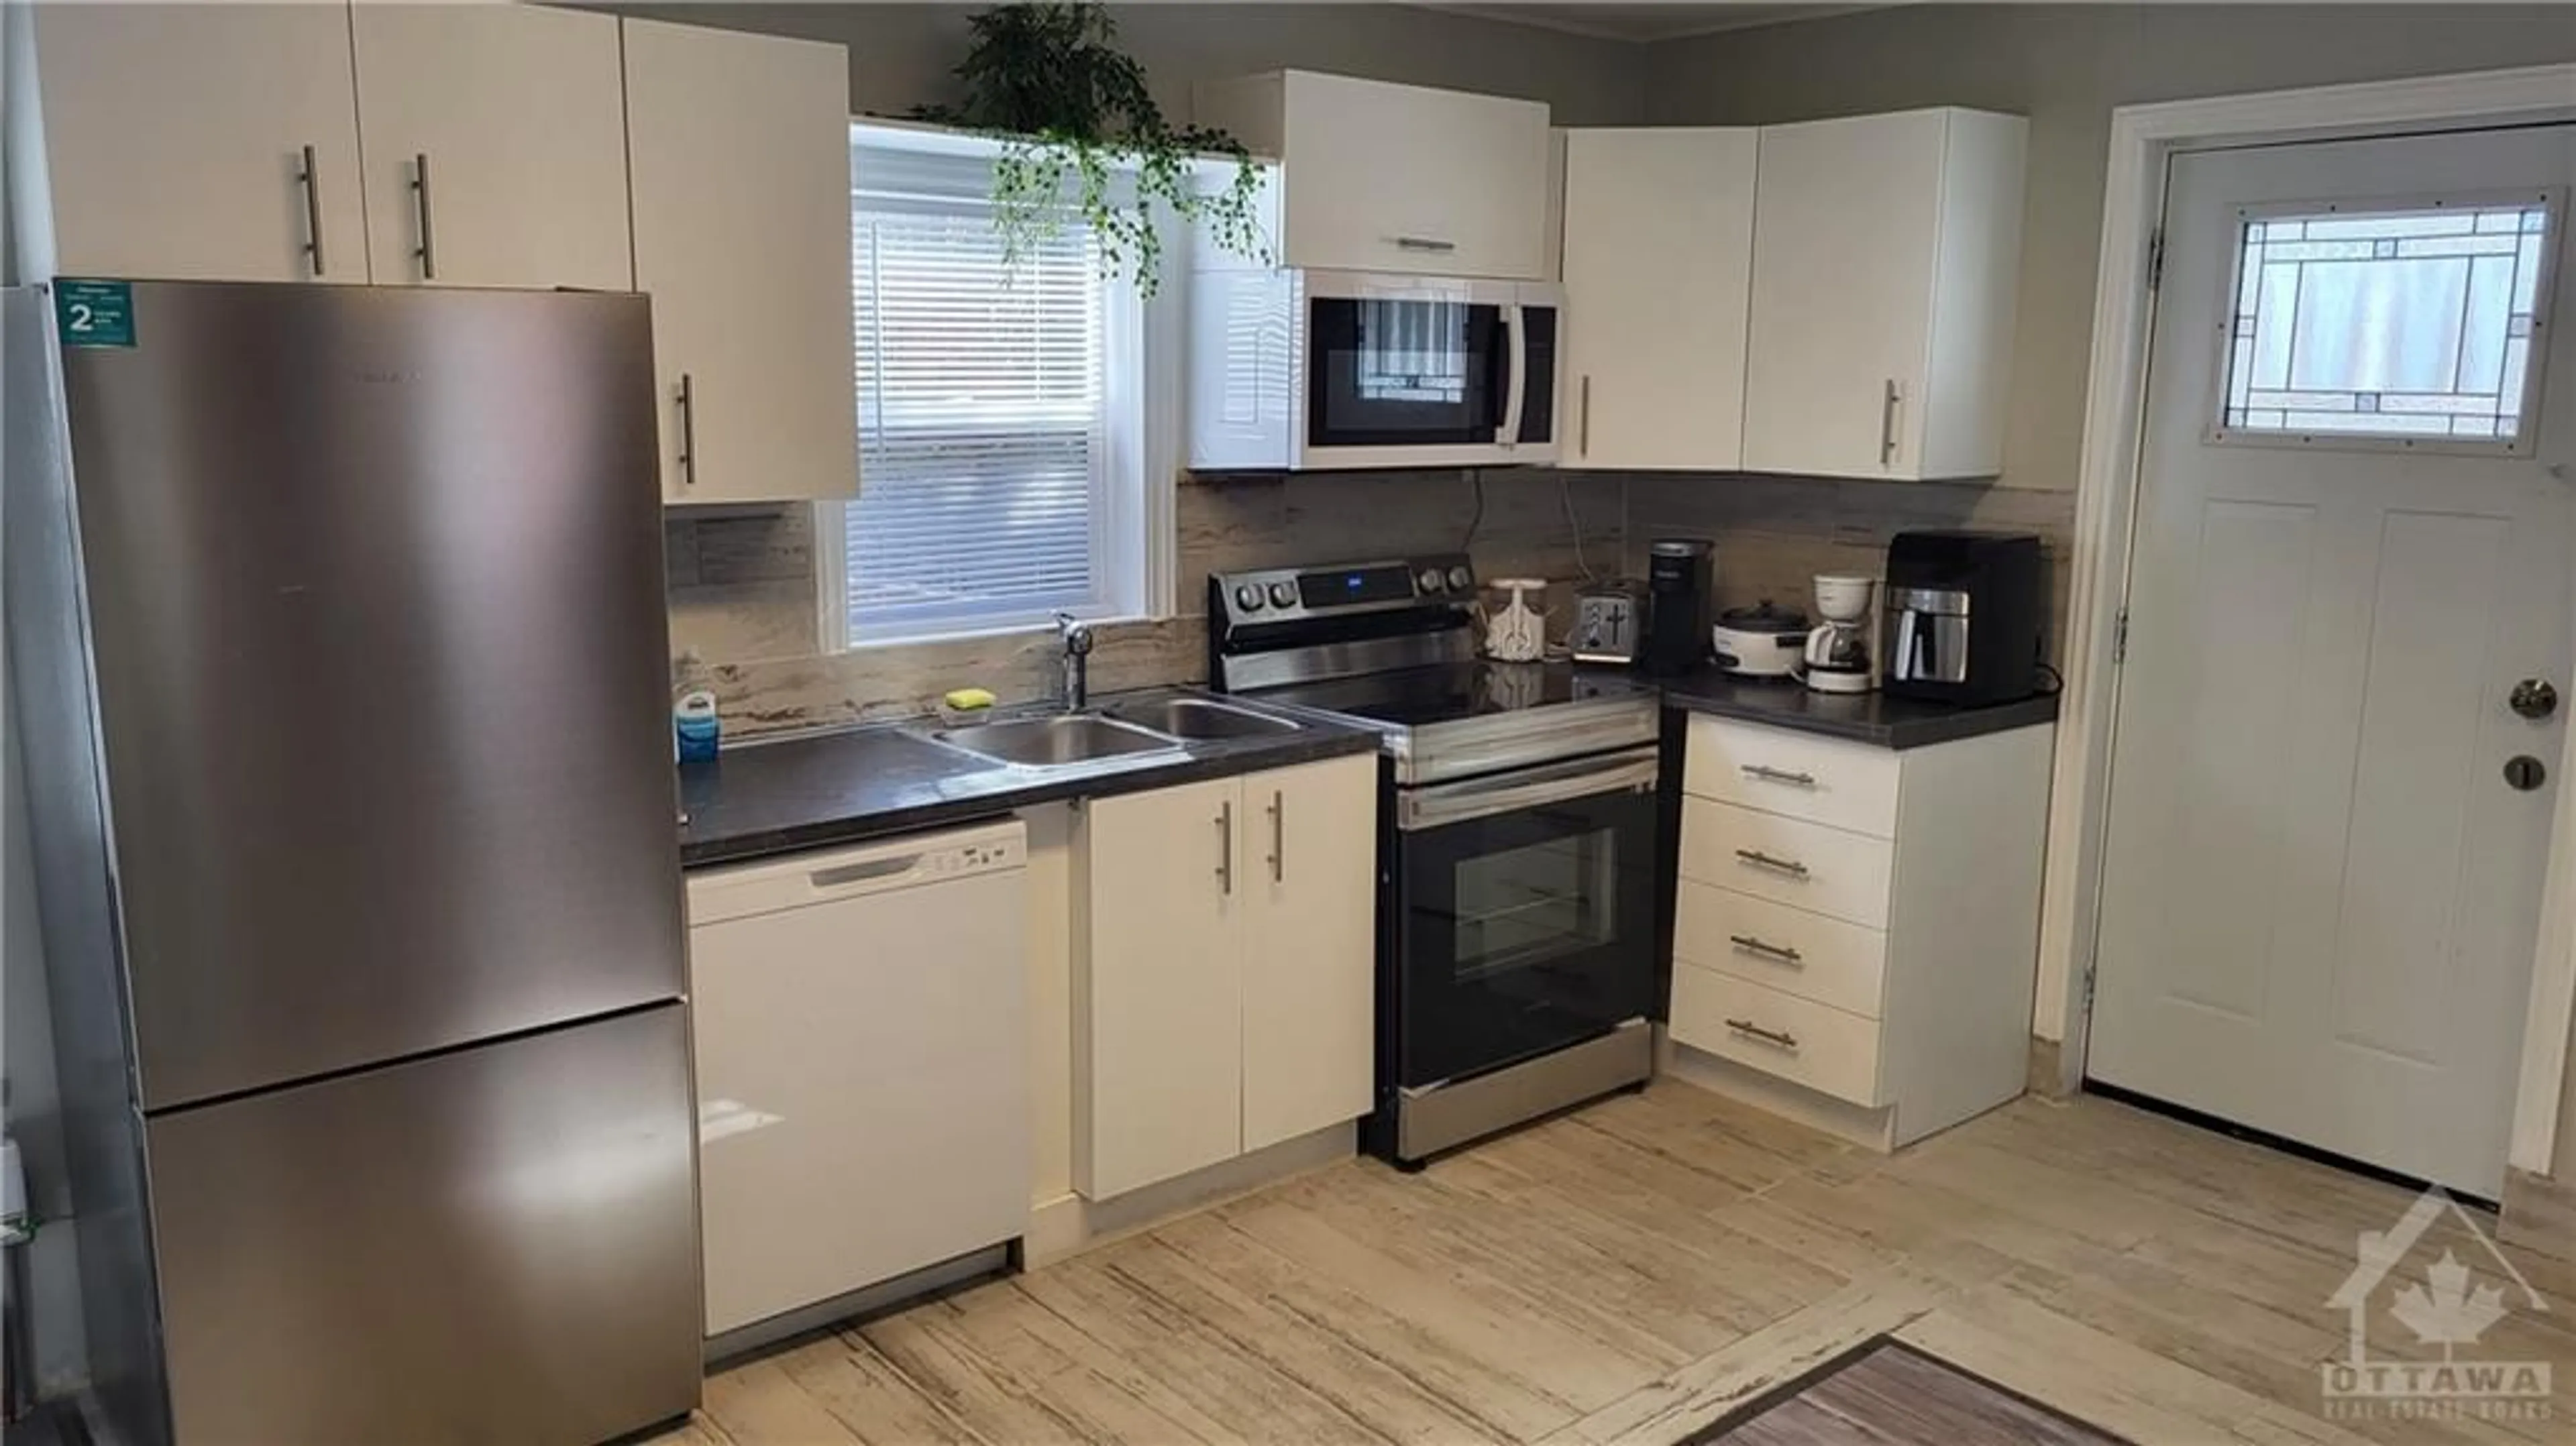 Standard kitchen for 110 JARVIS St, Cornwall Ontario K6H 5J2